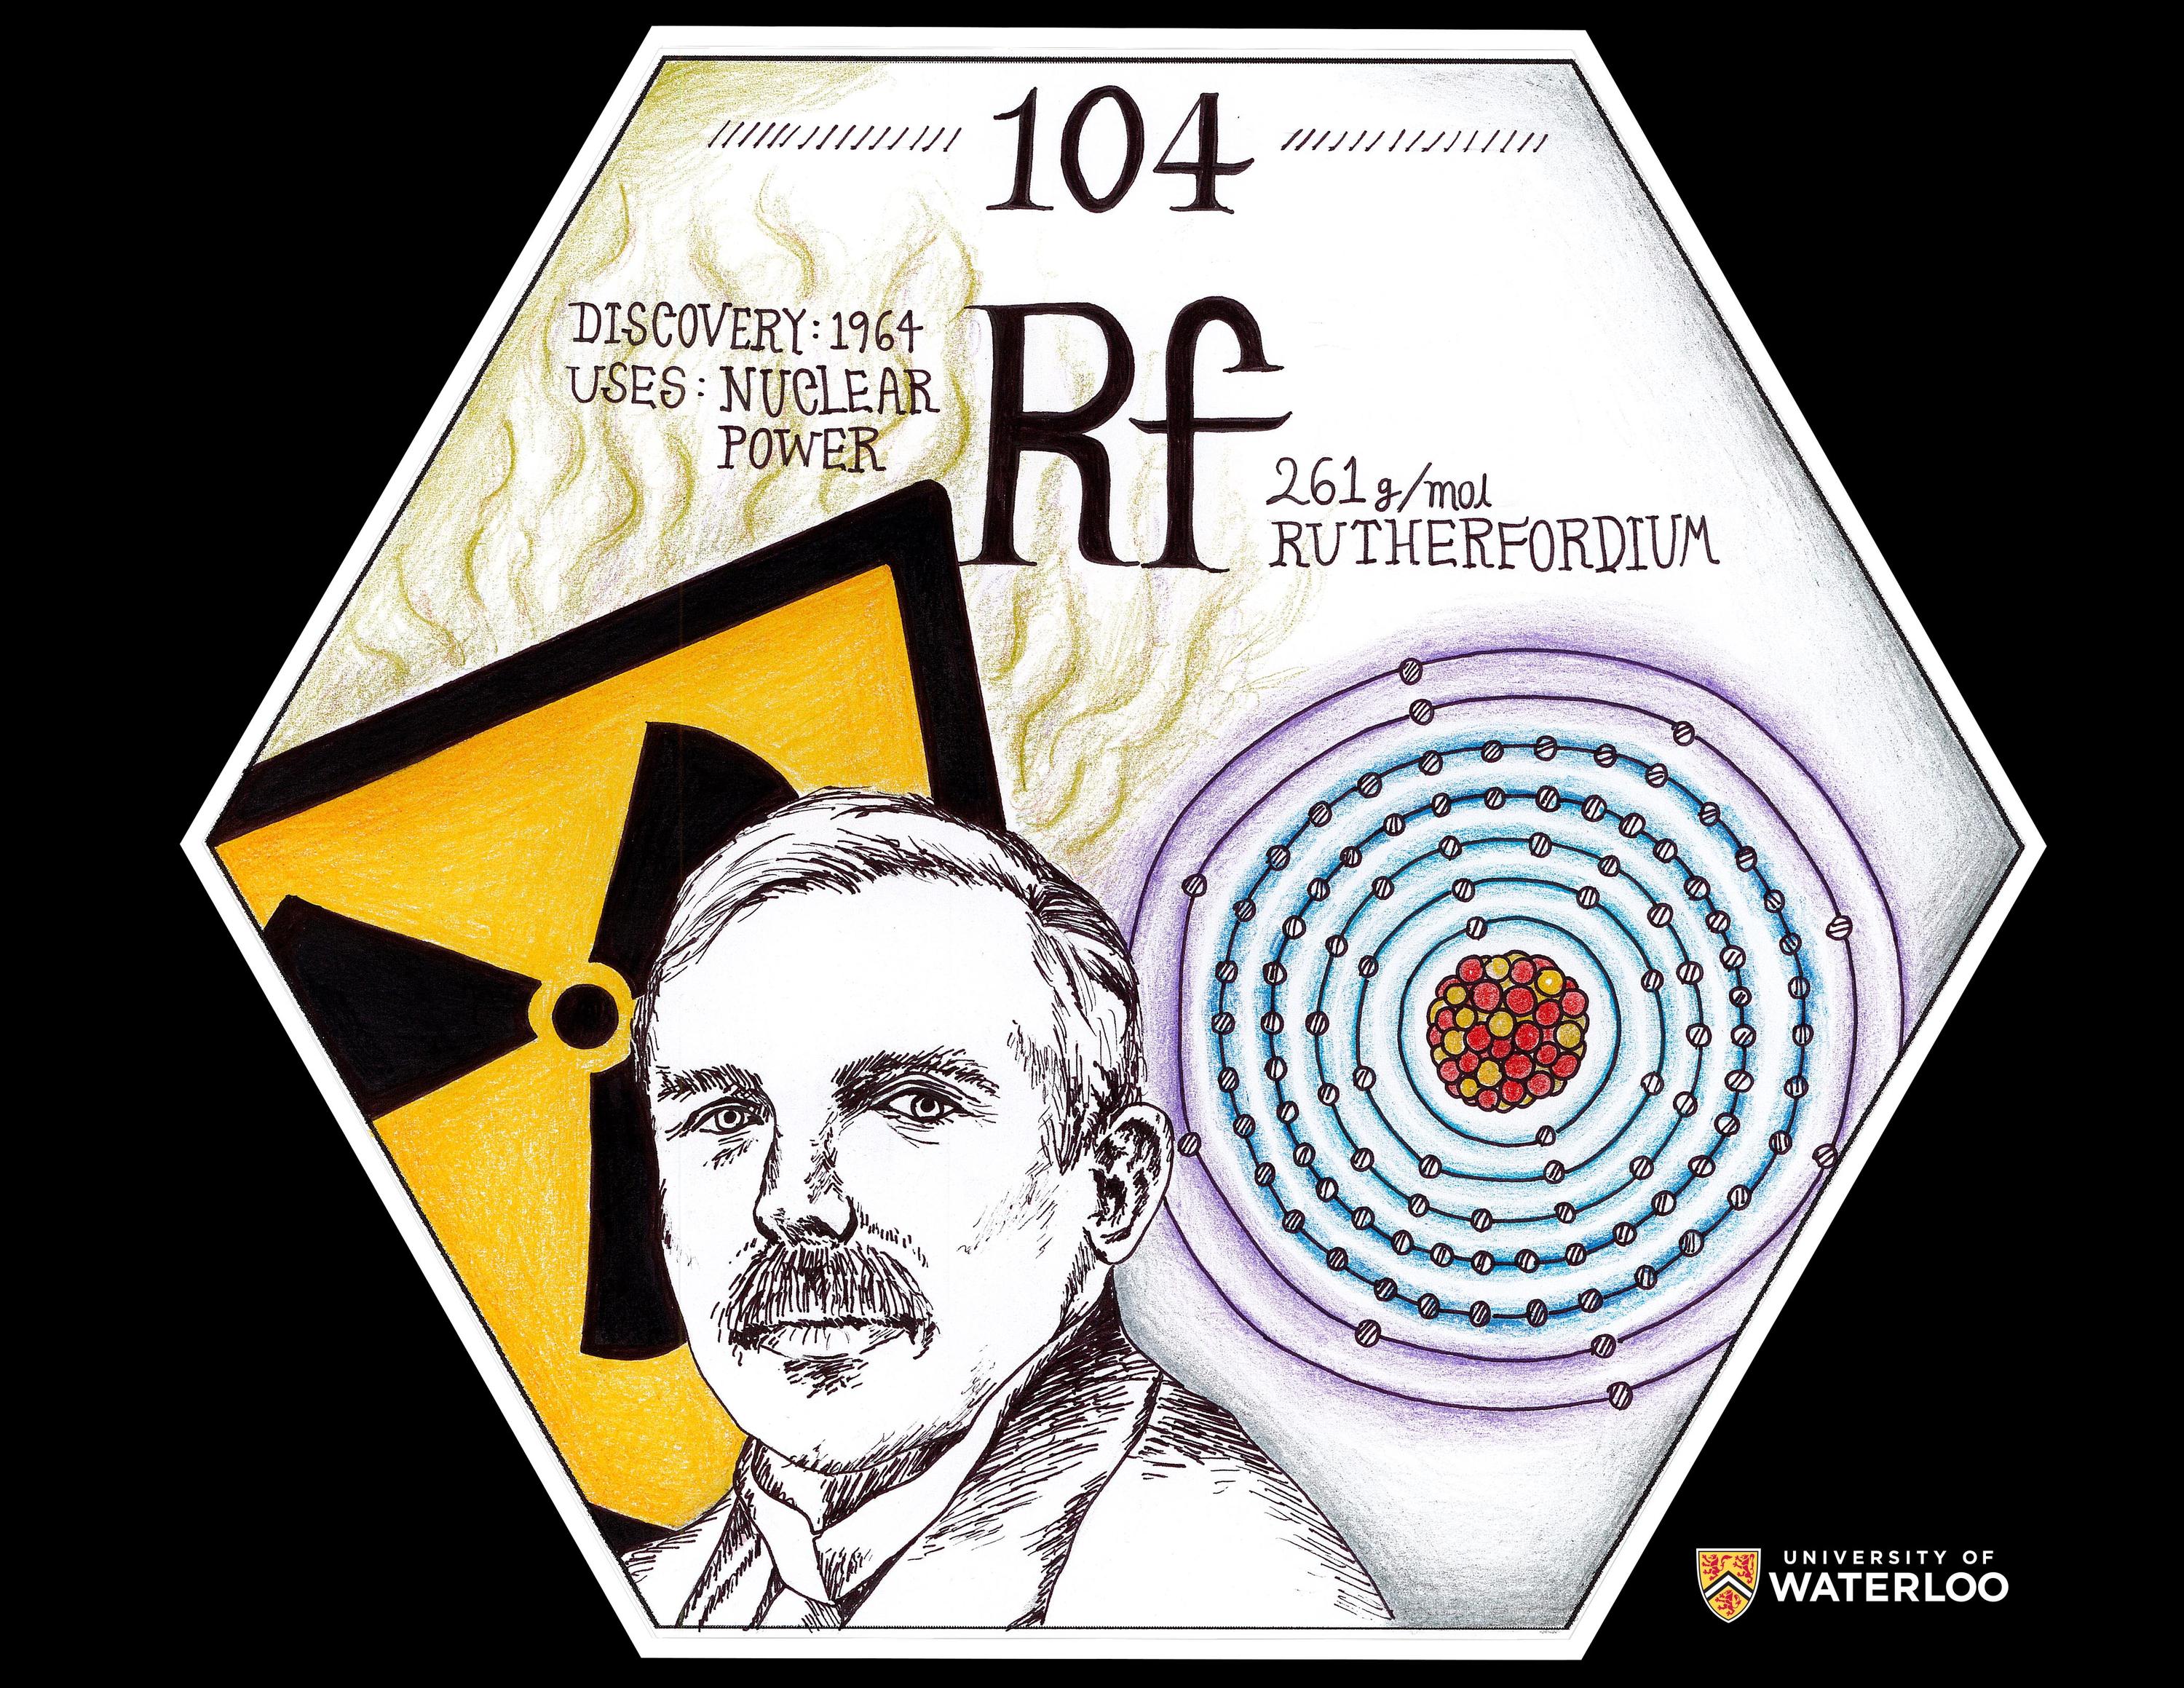  Nuclear Power”; the chemical symbol “Rf”, “361 g/mol” and “Rutherfordium”. Three images across the bottom half include a nuclear hazard symbol, a Bohr model of rutherfordium, and a pen-and-ink portrait of Ernest Rutherford in the foreground.